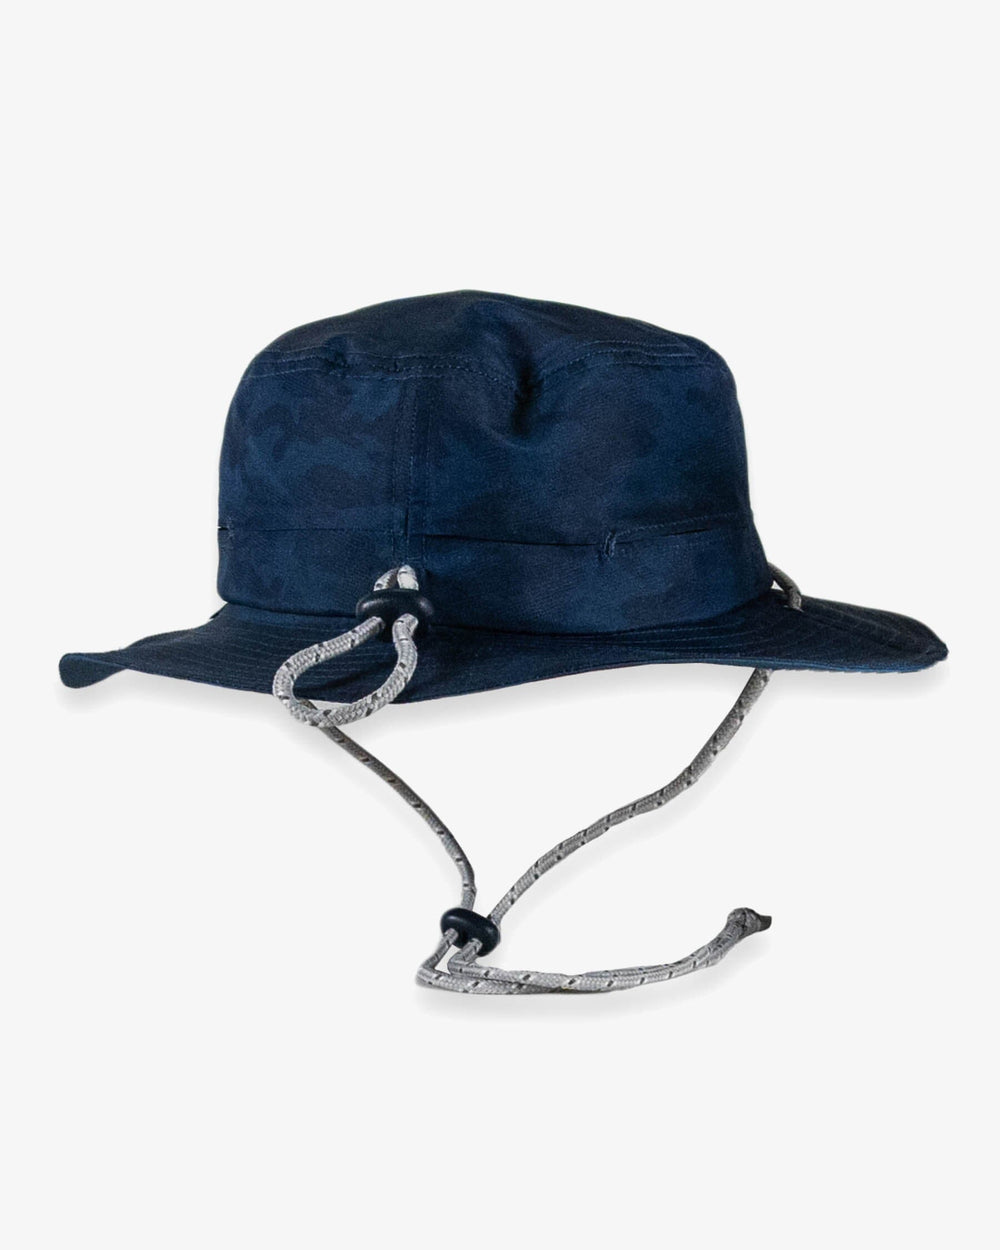 The back view of the Southern Tide Waterway Camo Print Performance Sun Hat by Southern Tide - True Navy